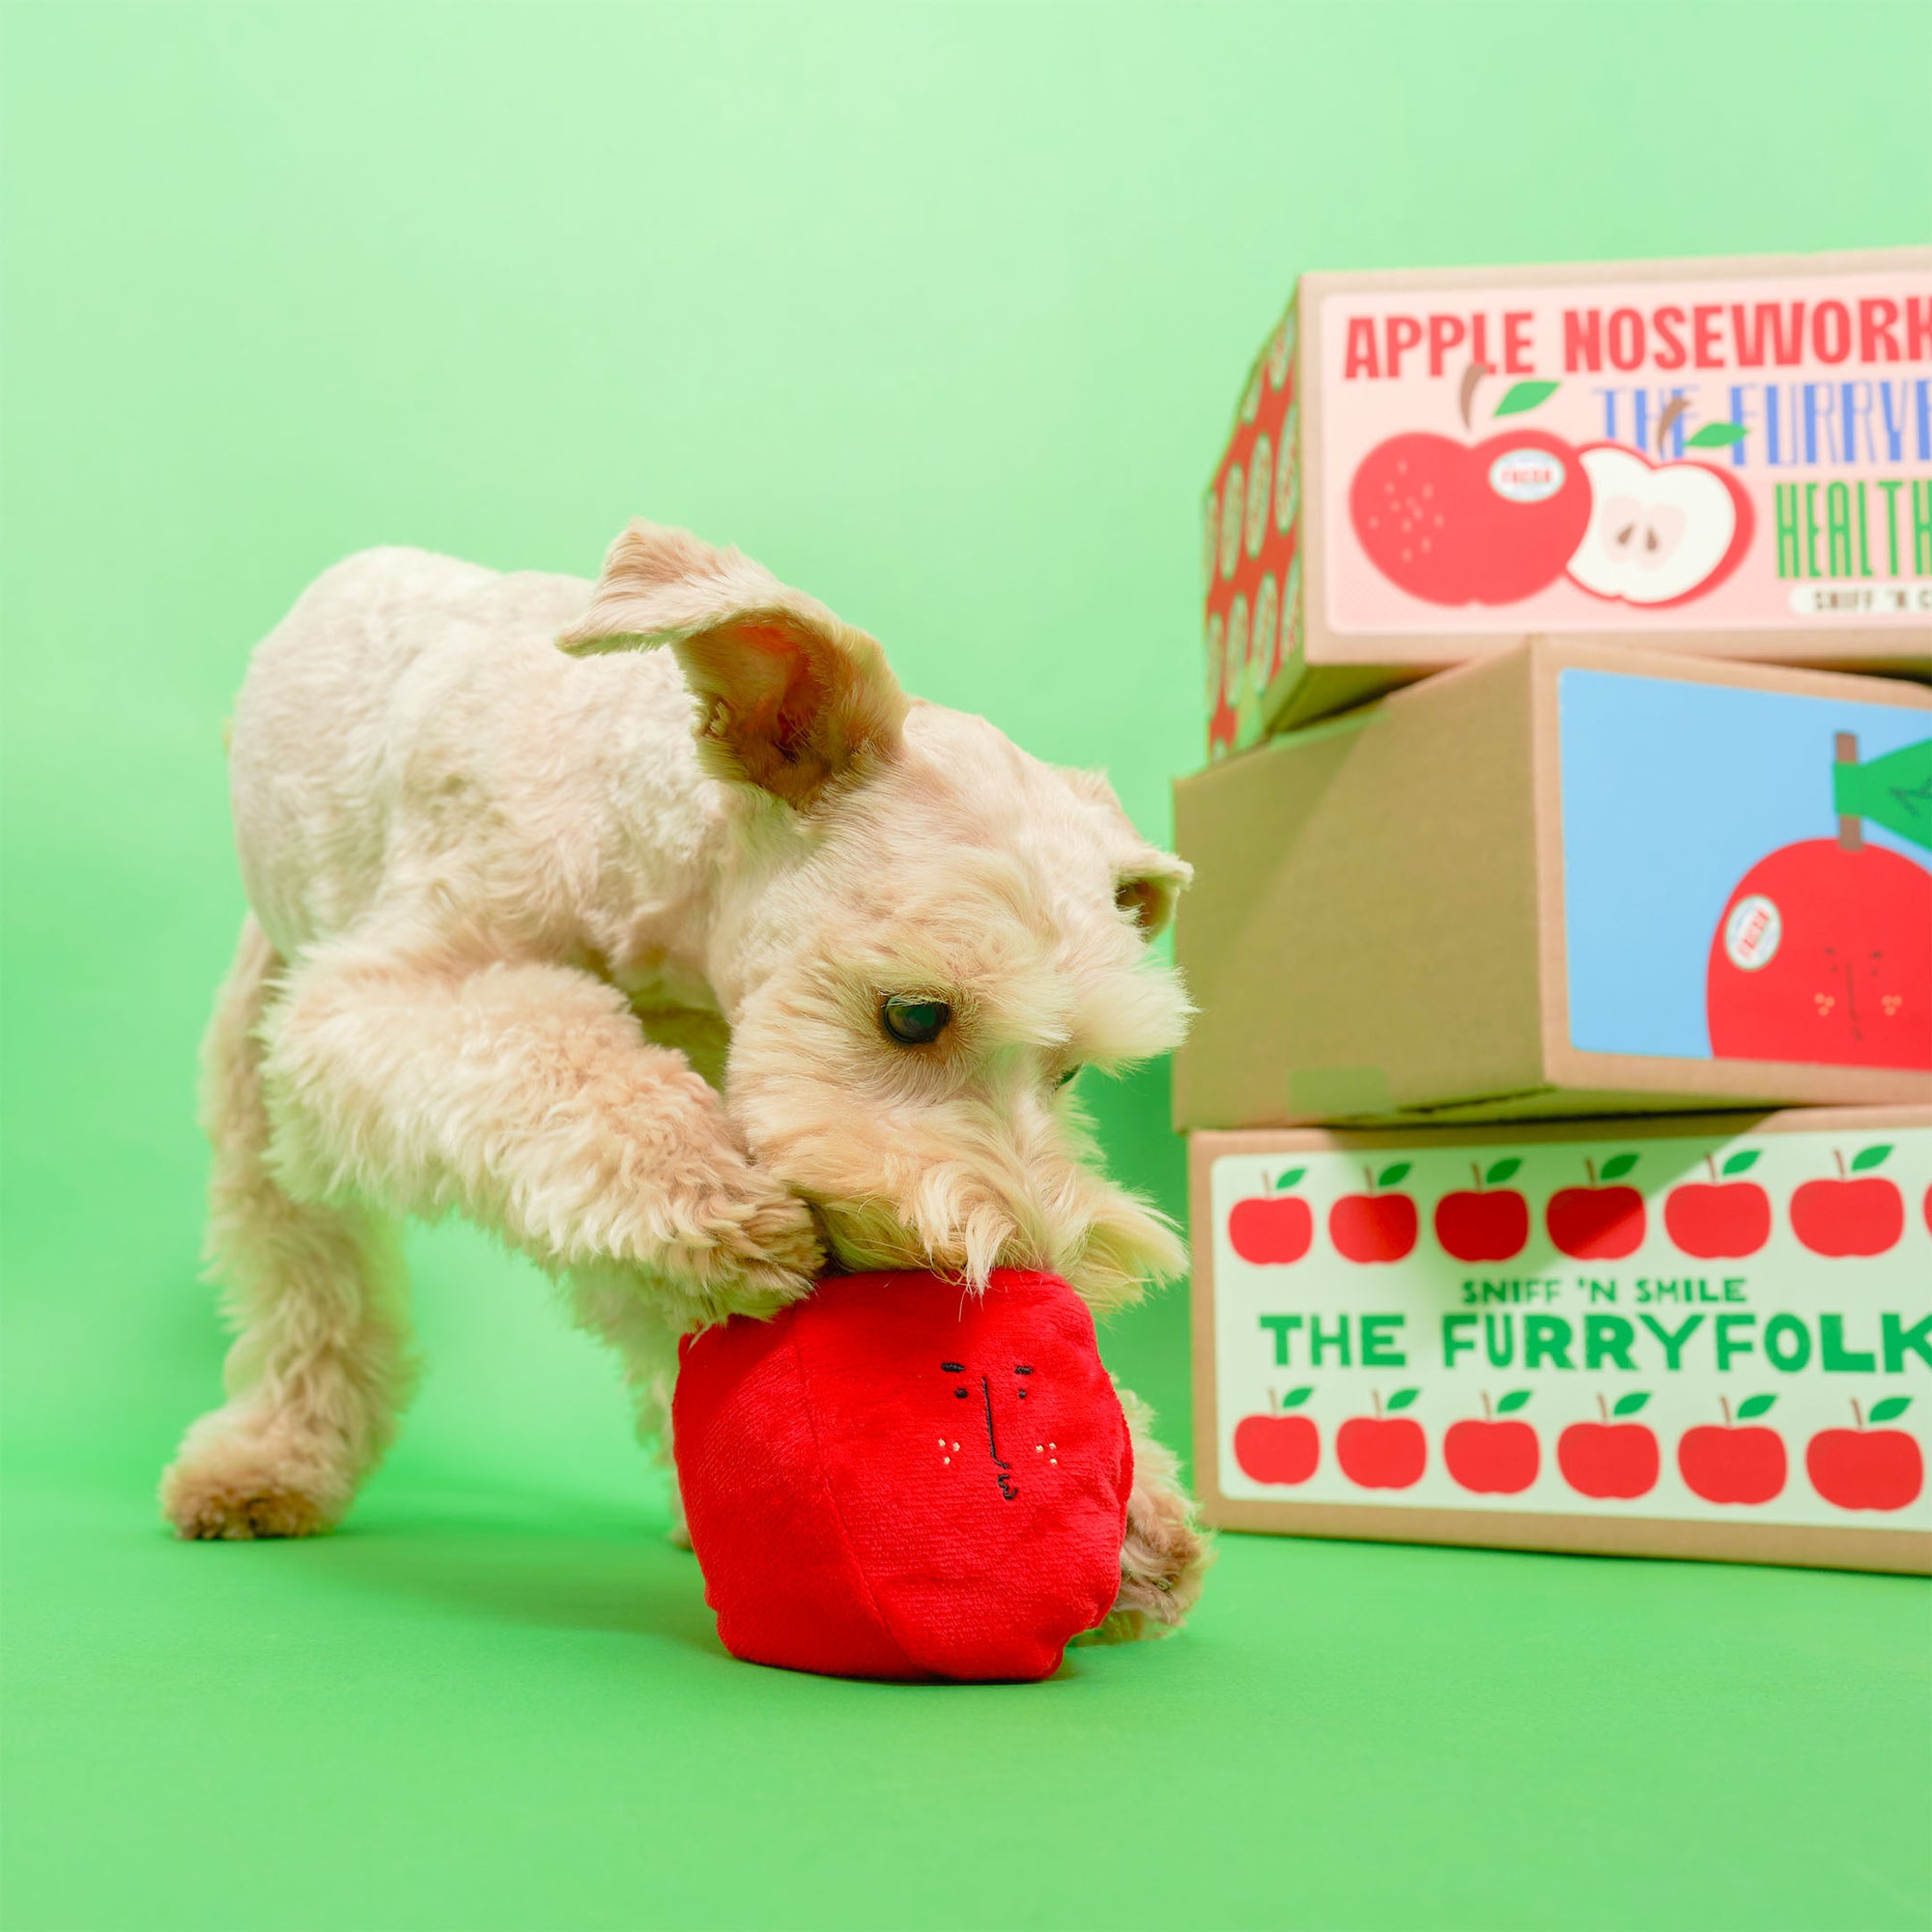 A white dog engaging with a red apple-shaped dog toy on a green background, with a cardboard box in the background labeled "Apple Nosework Toy by The Furryfolks".